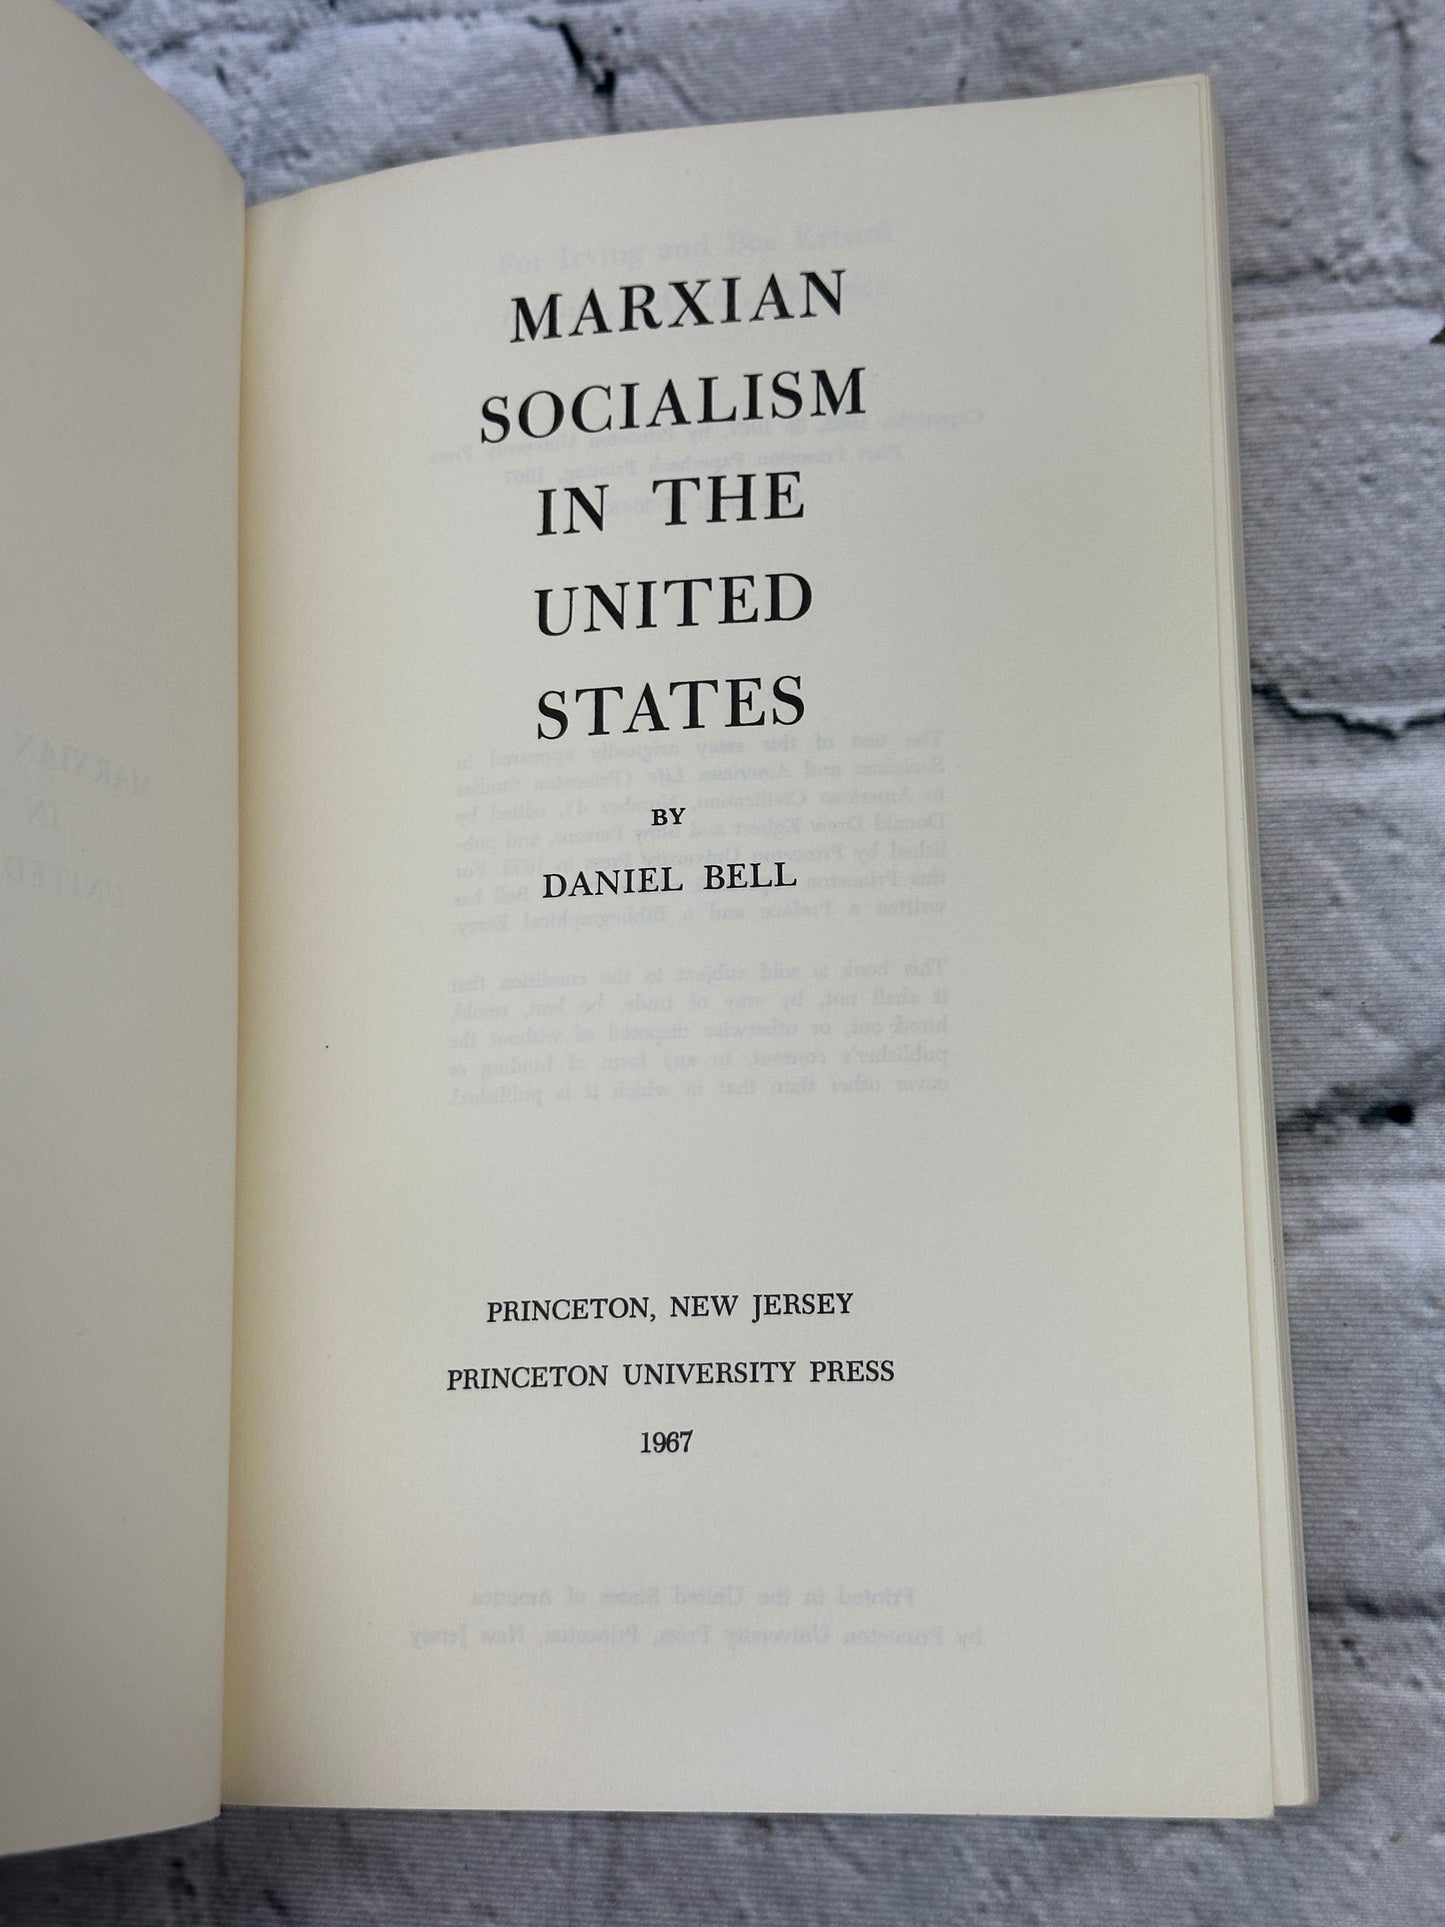 Marxian Socialism in the United States by Daniel Bell [1967]